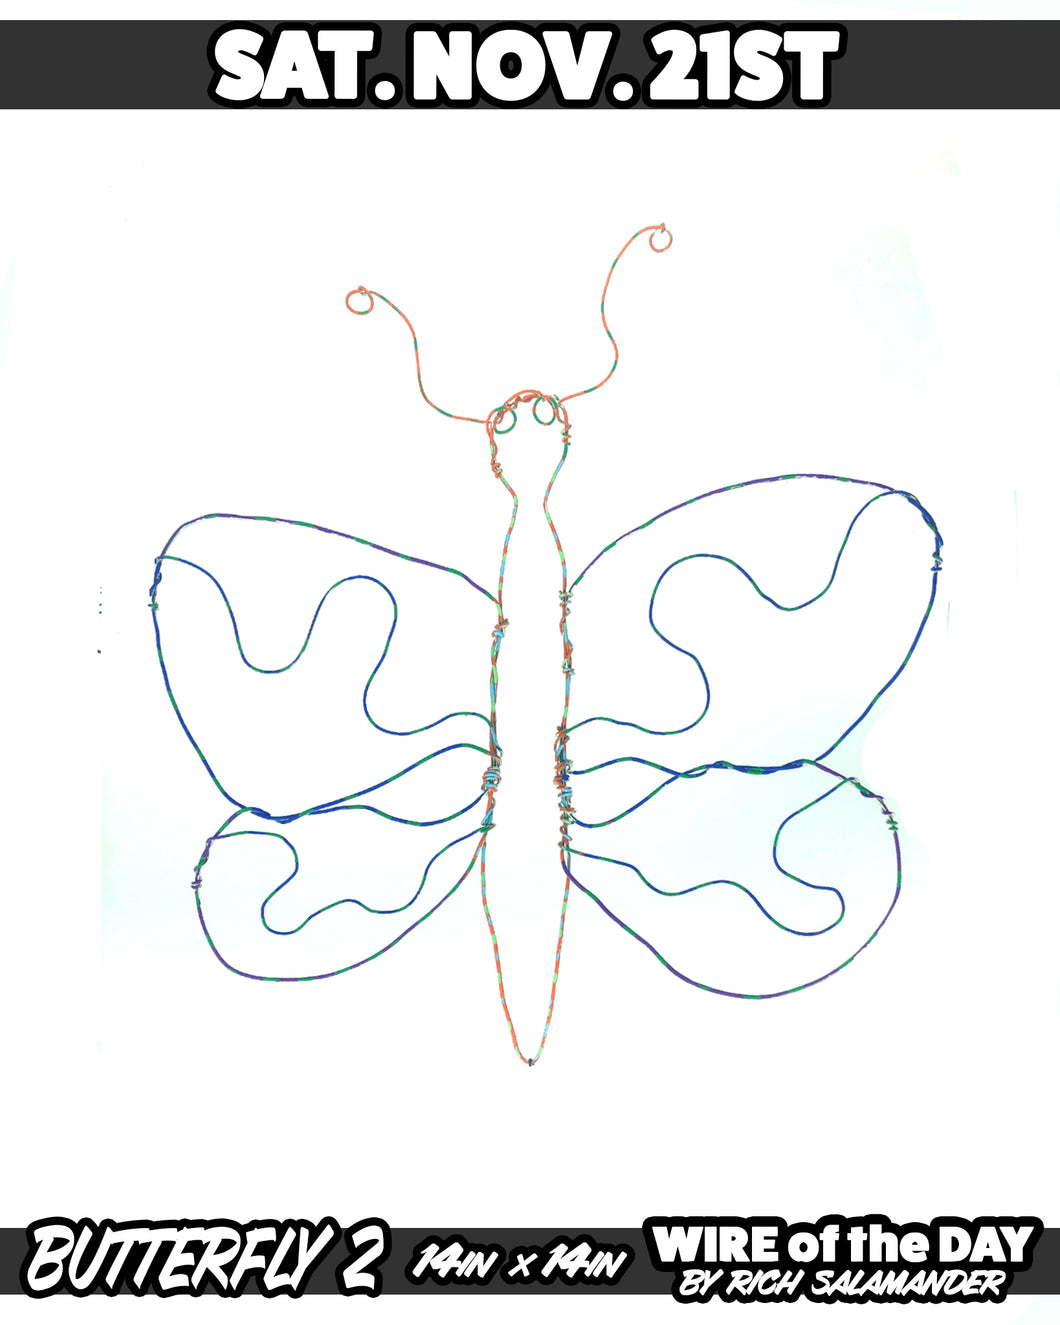 WIRE of the DAY BUTTERFLY 2